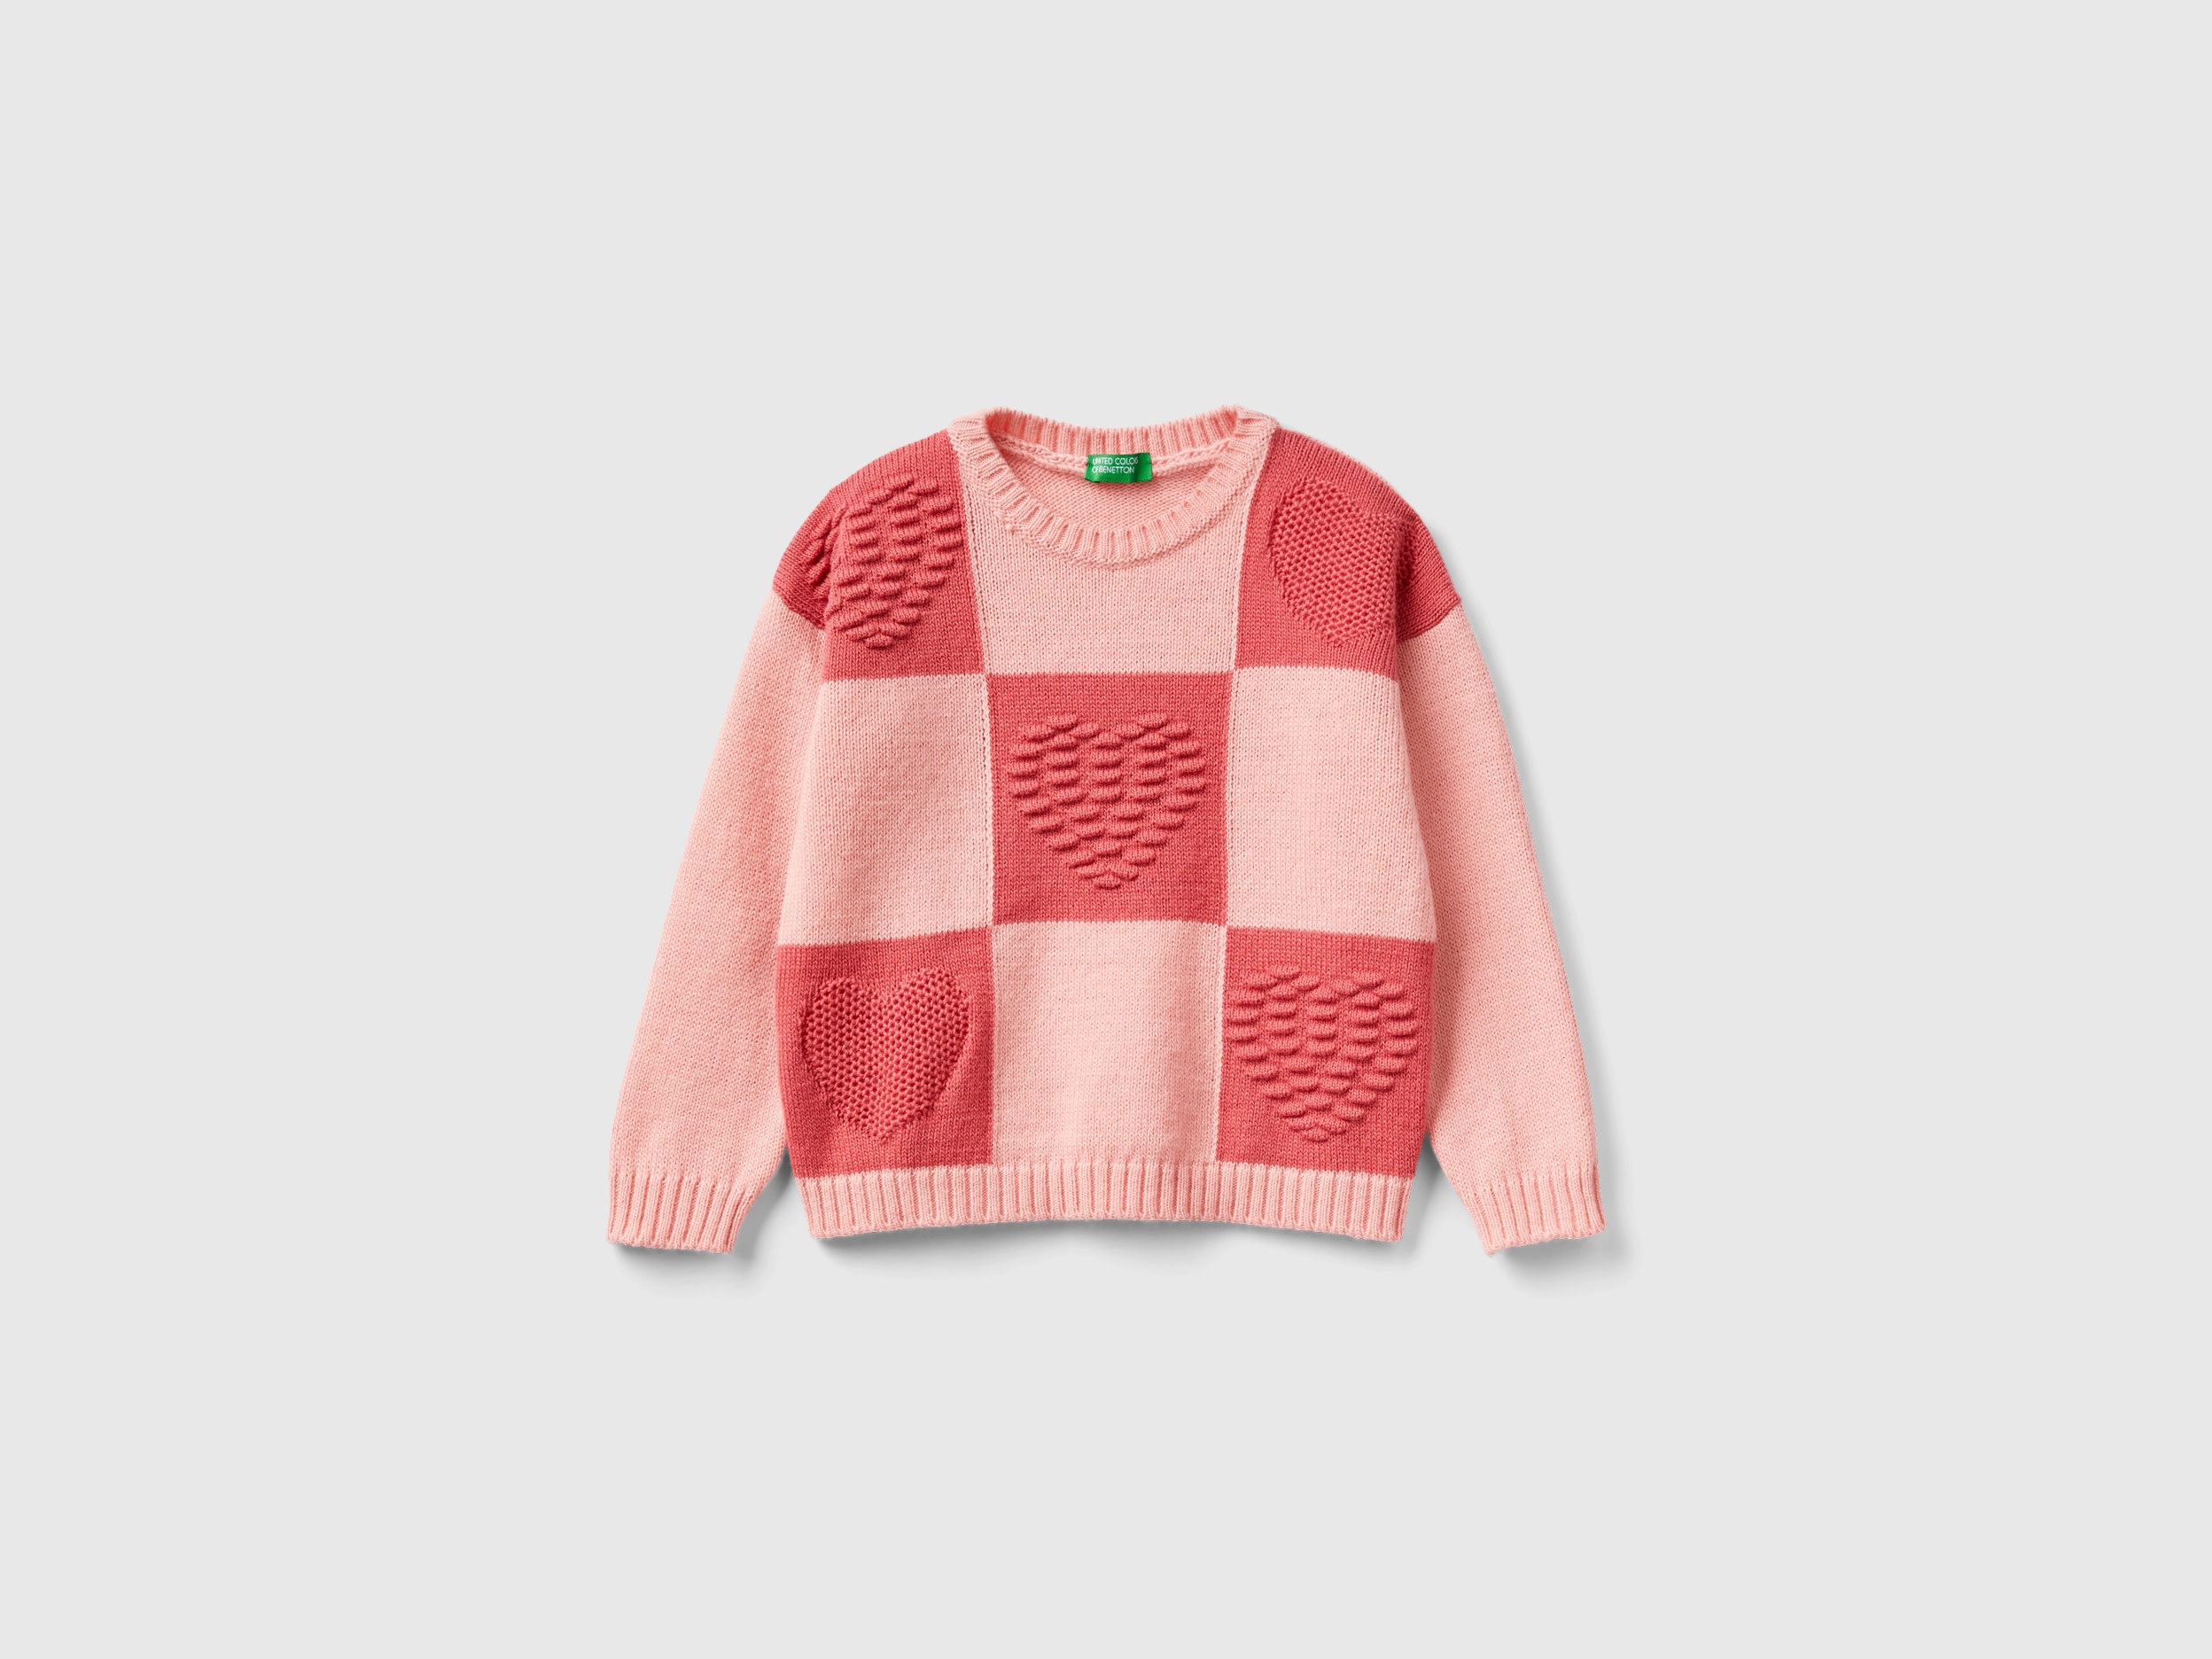 Benetton, Checkered Sweater With Hearts, size 12-18, Pink, Kids